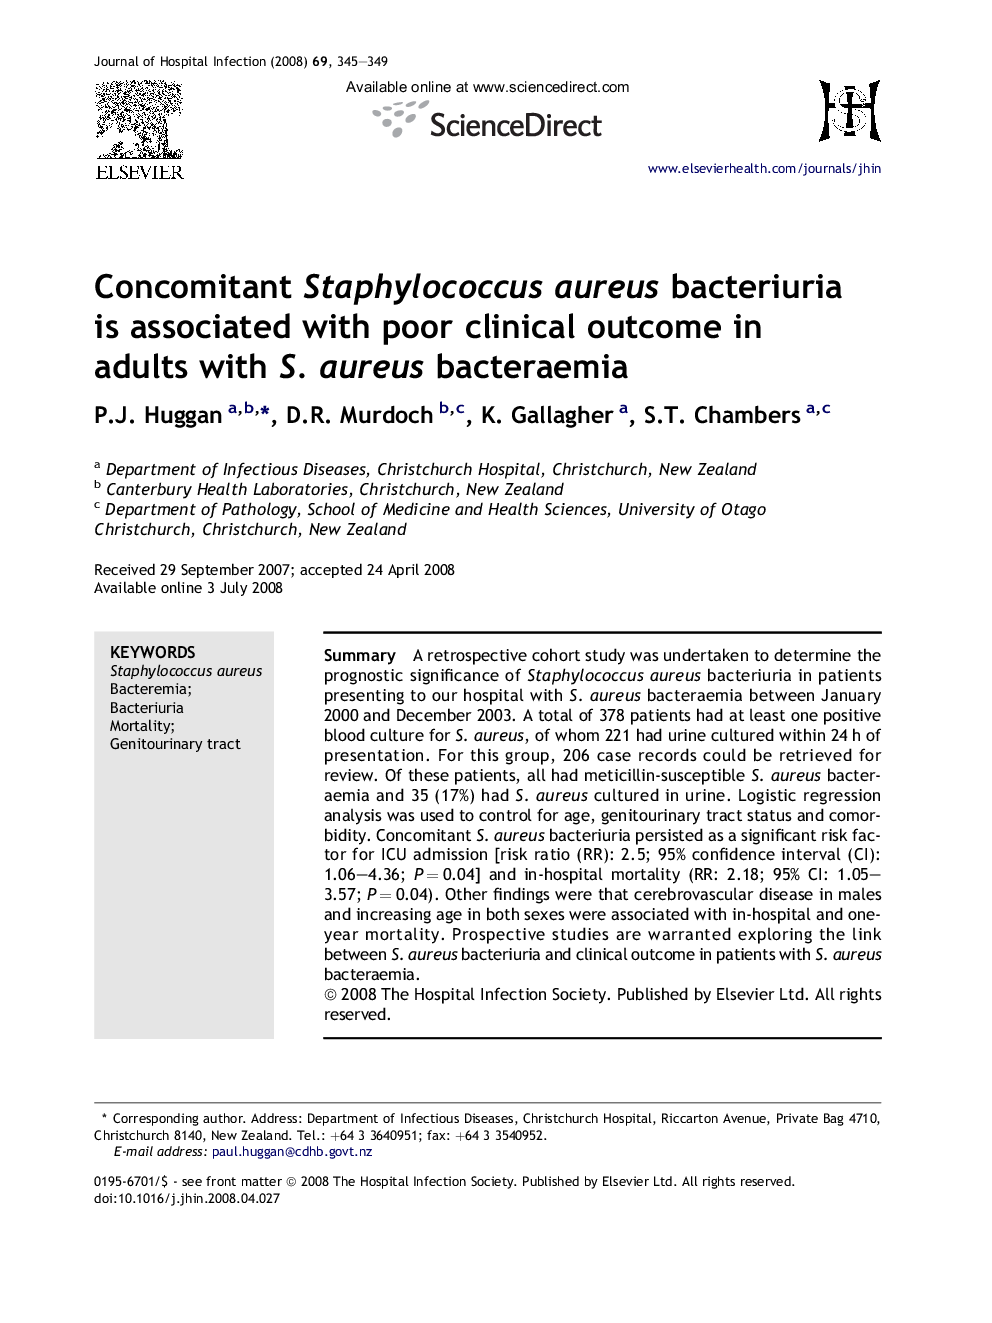 Concomitant Staphylococcus aureus bacteriuria is associated with poor clinical outcome in adults with S. aureus bacteraemia